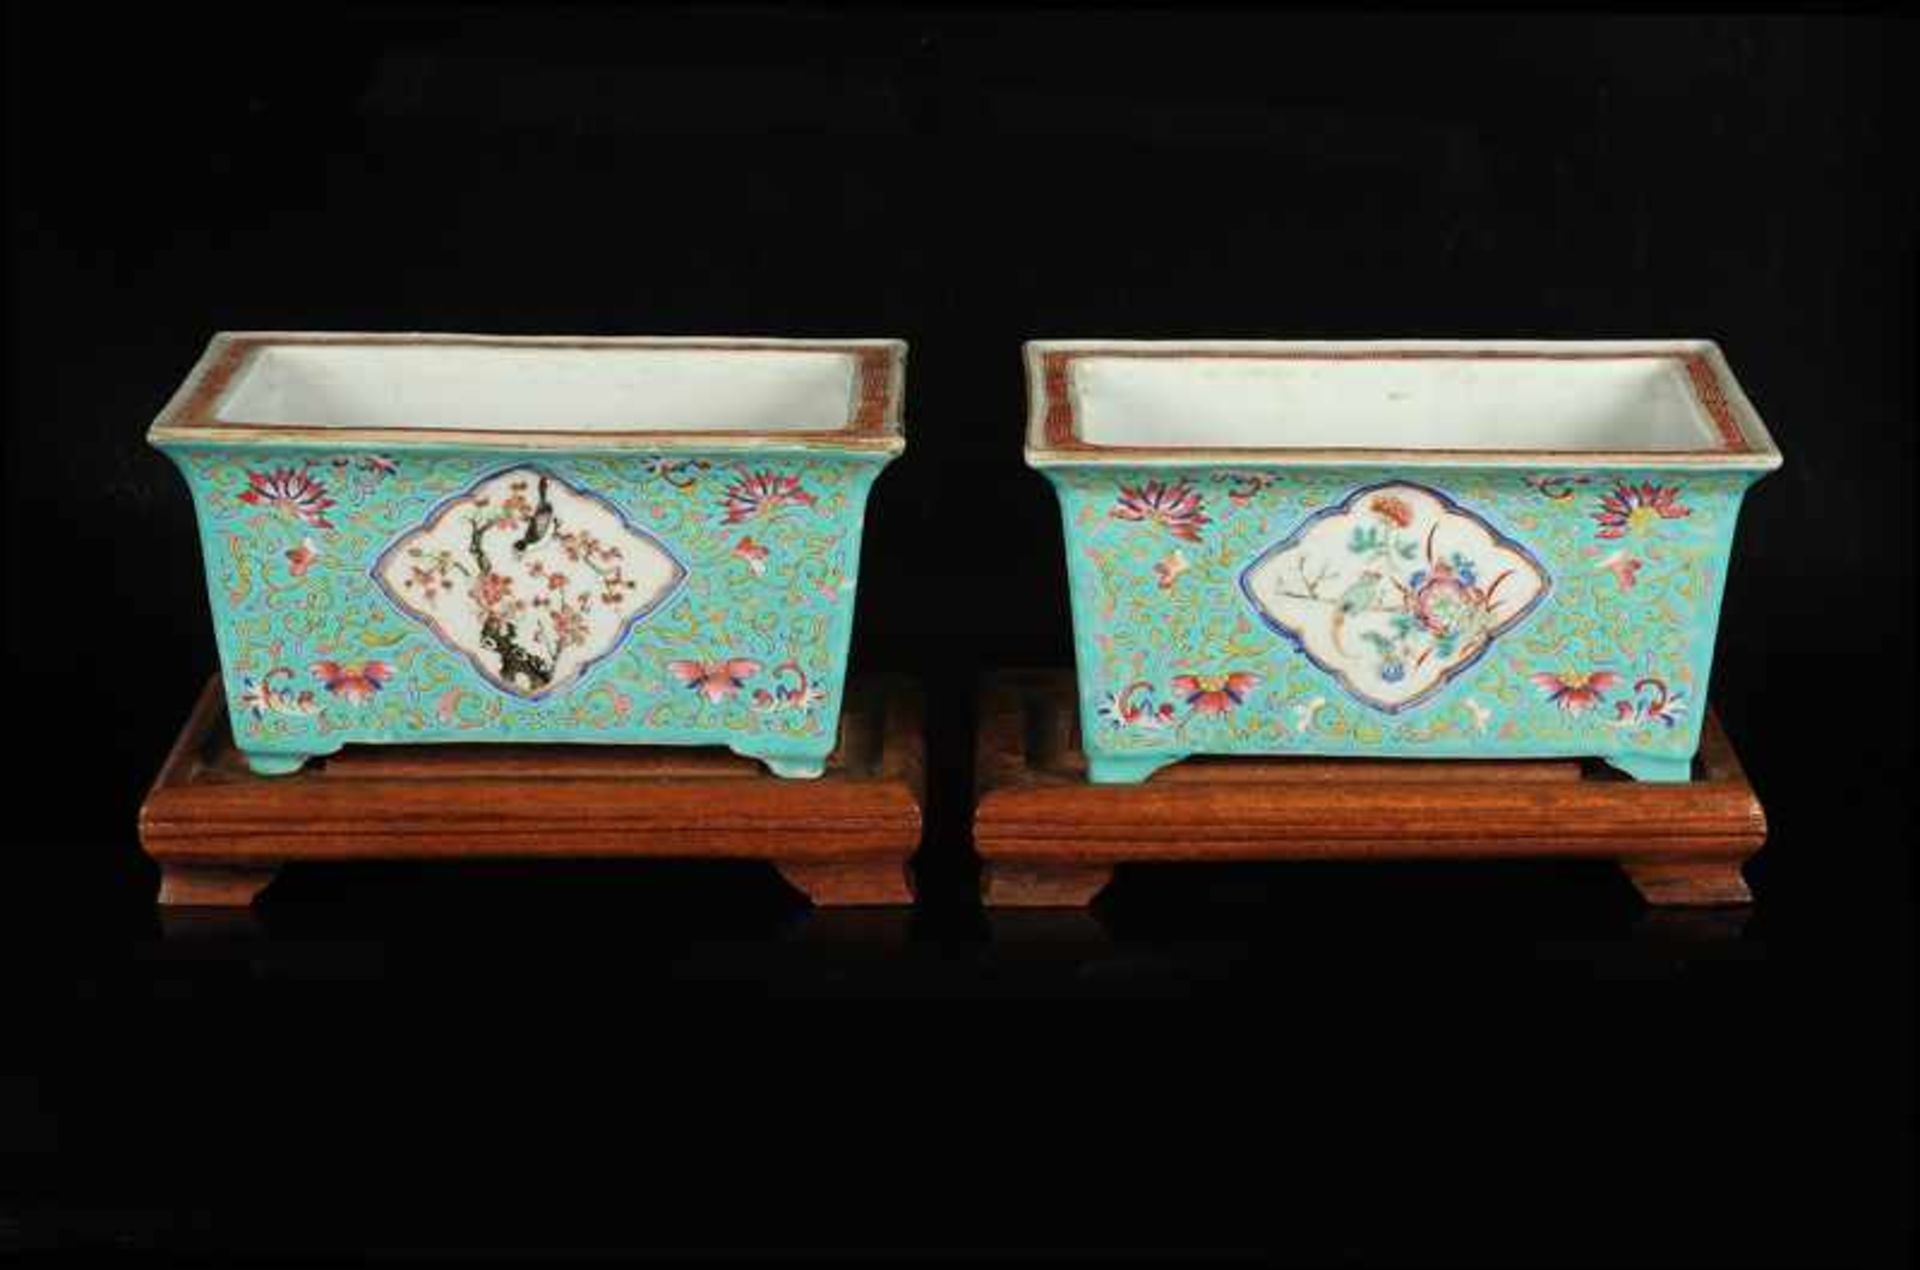 A pair of green glazed porcelain jardinières with a polychrome decor of birds and flower branches.